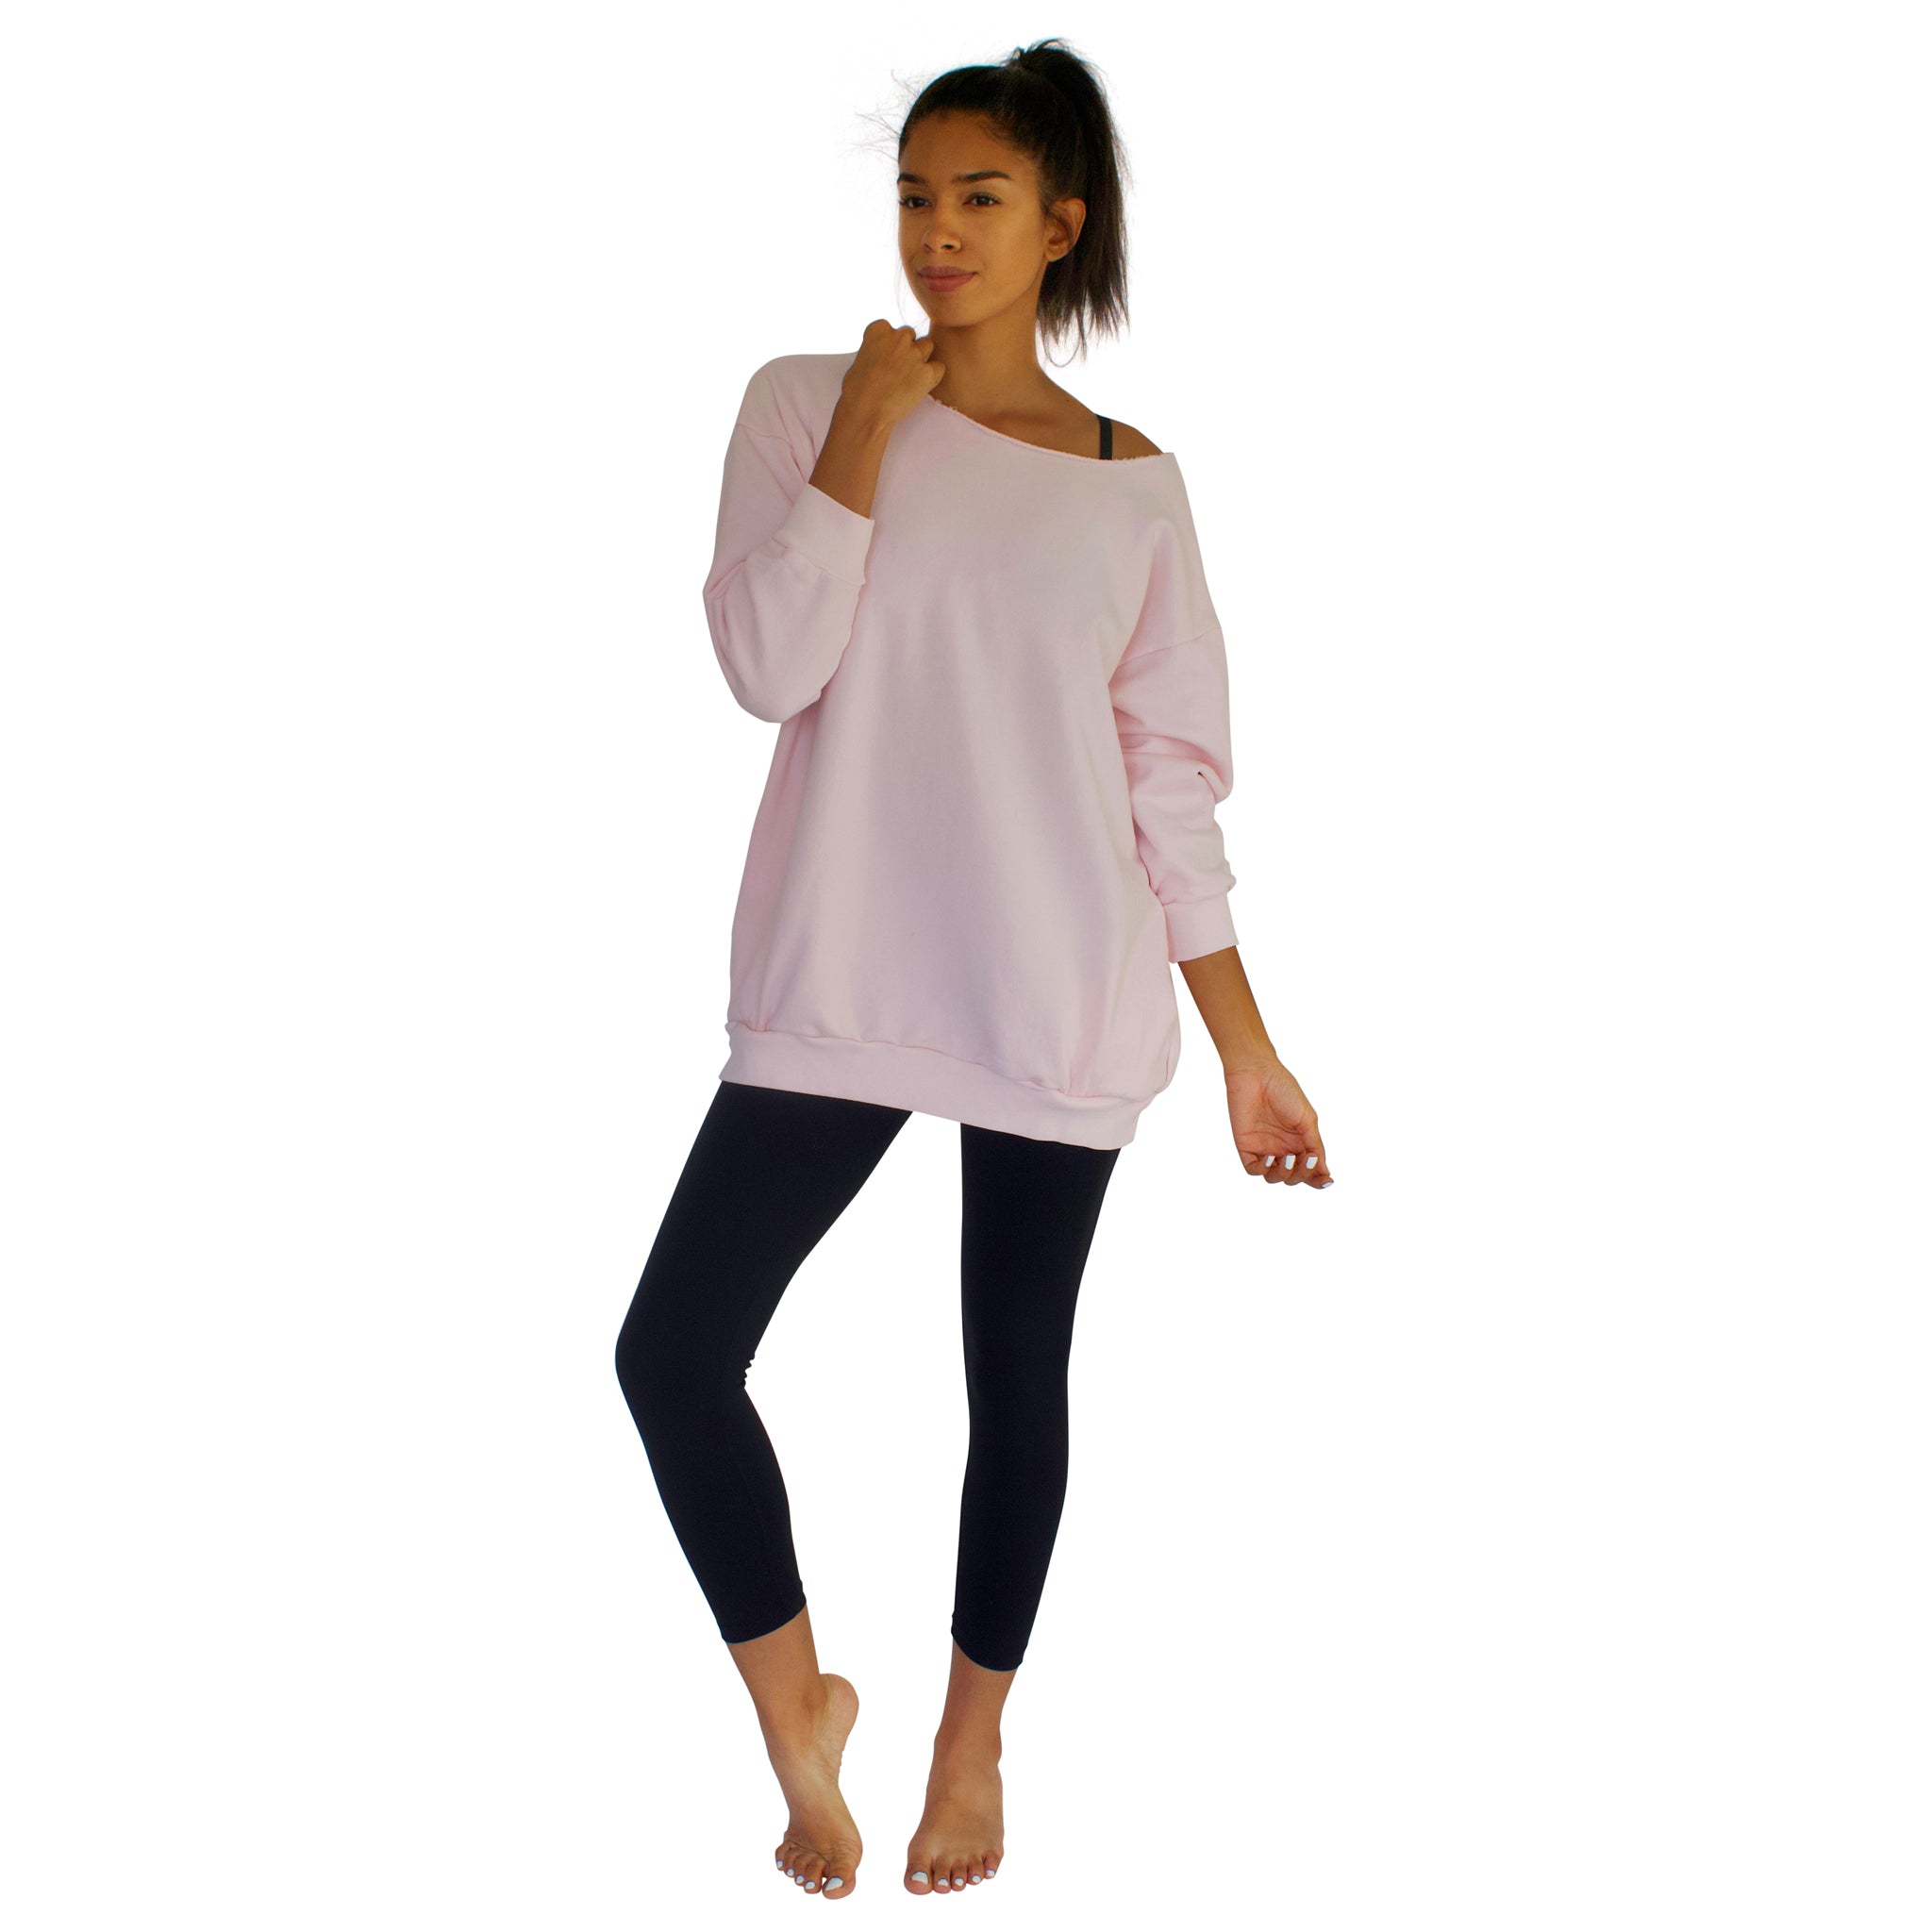 Our best selling oversized french terry top with raw edge neckline, side seam pockets shown here in Candy Pink.